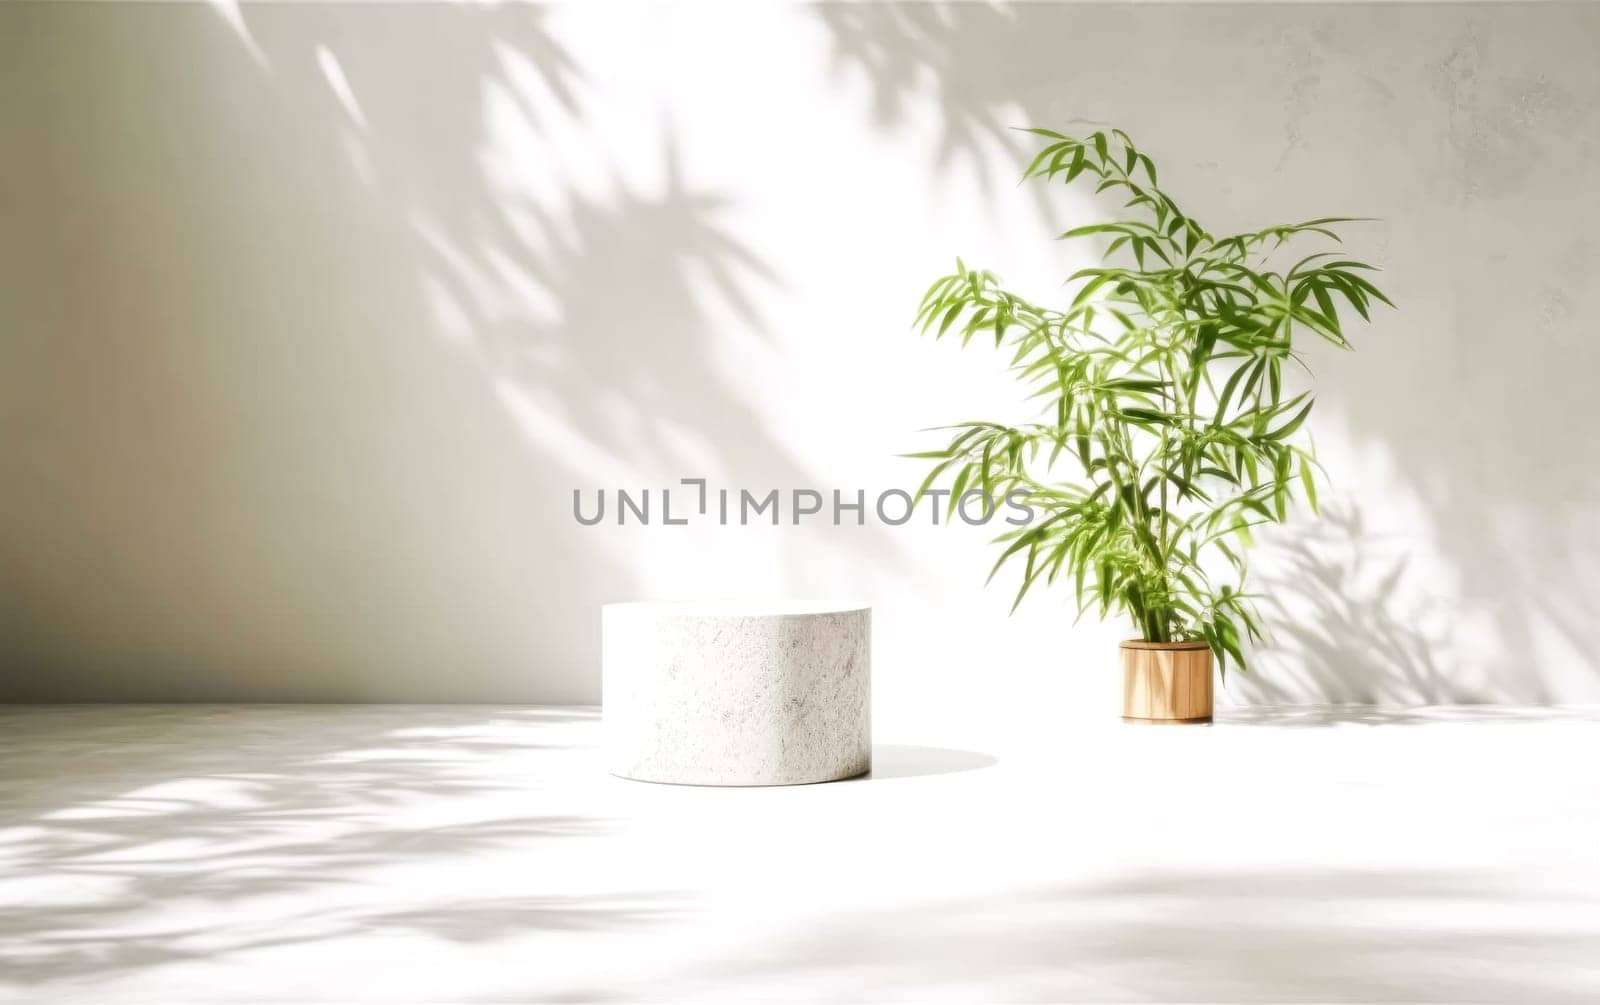 A white wall with a potted plant and a small white object, perfect as a background for photographing cosmetics.